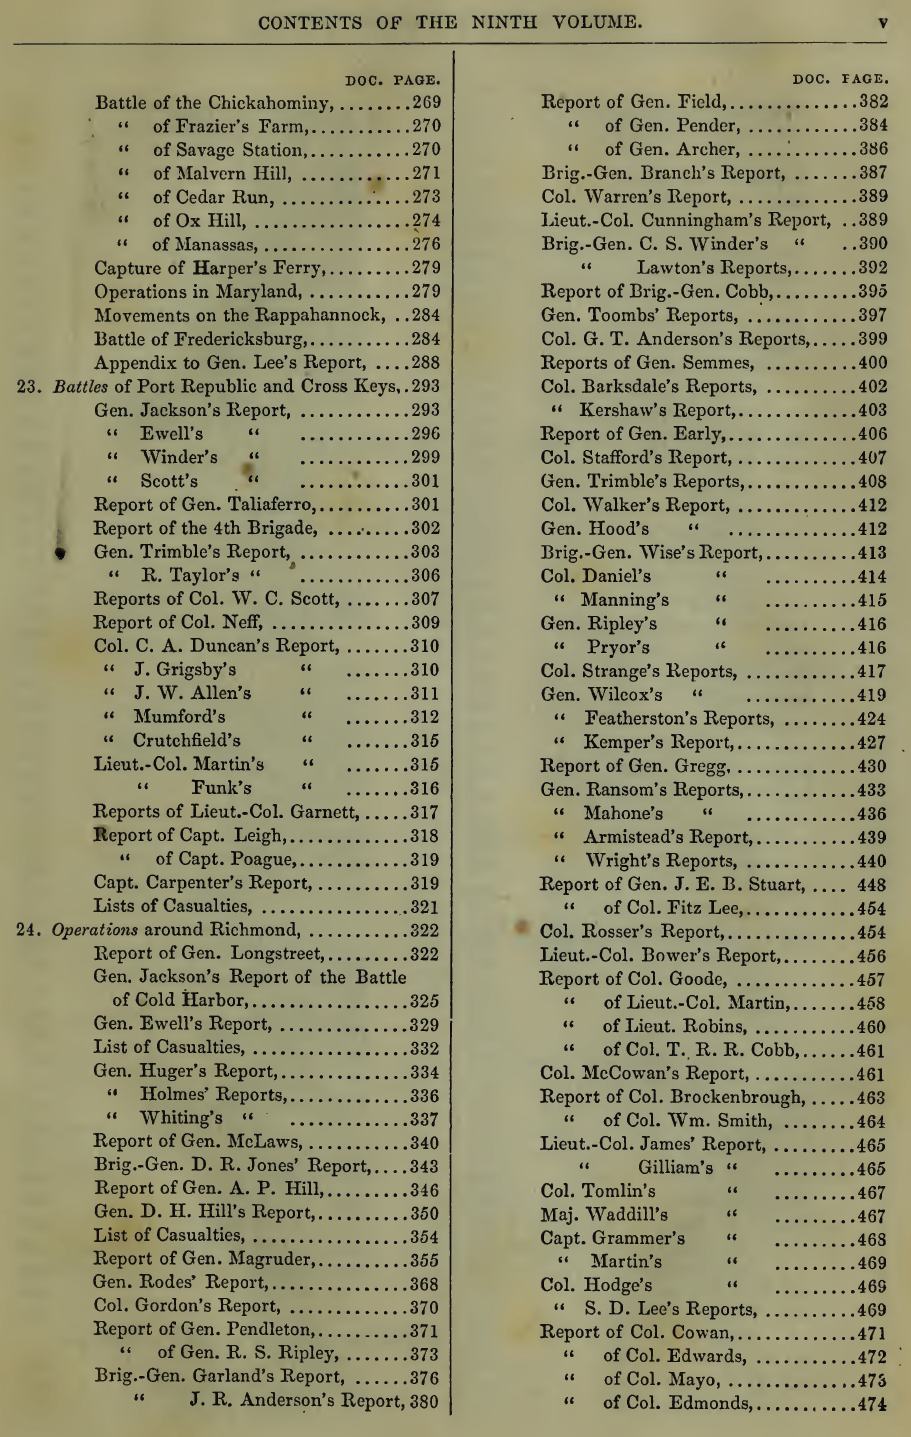 One page from the table of contents from Volume 9 of the Rebellion Record